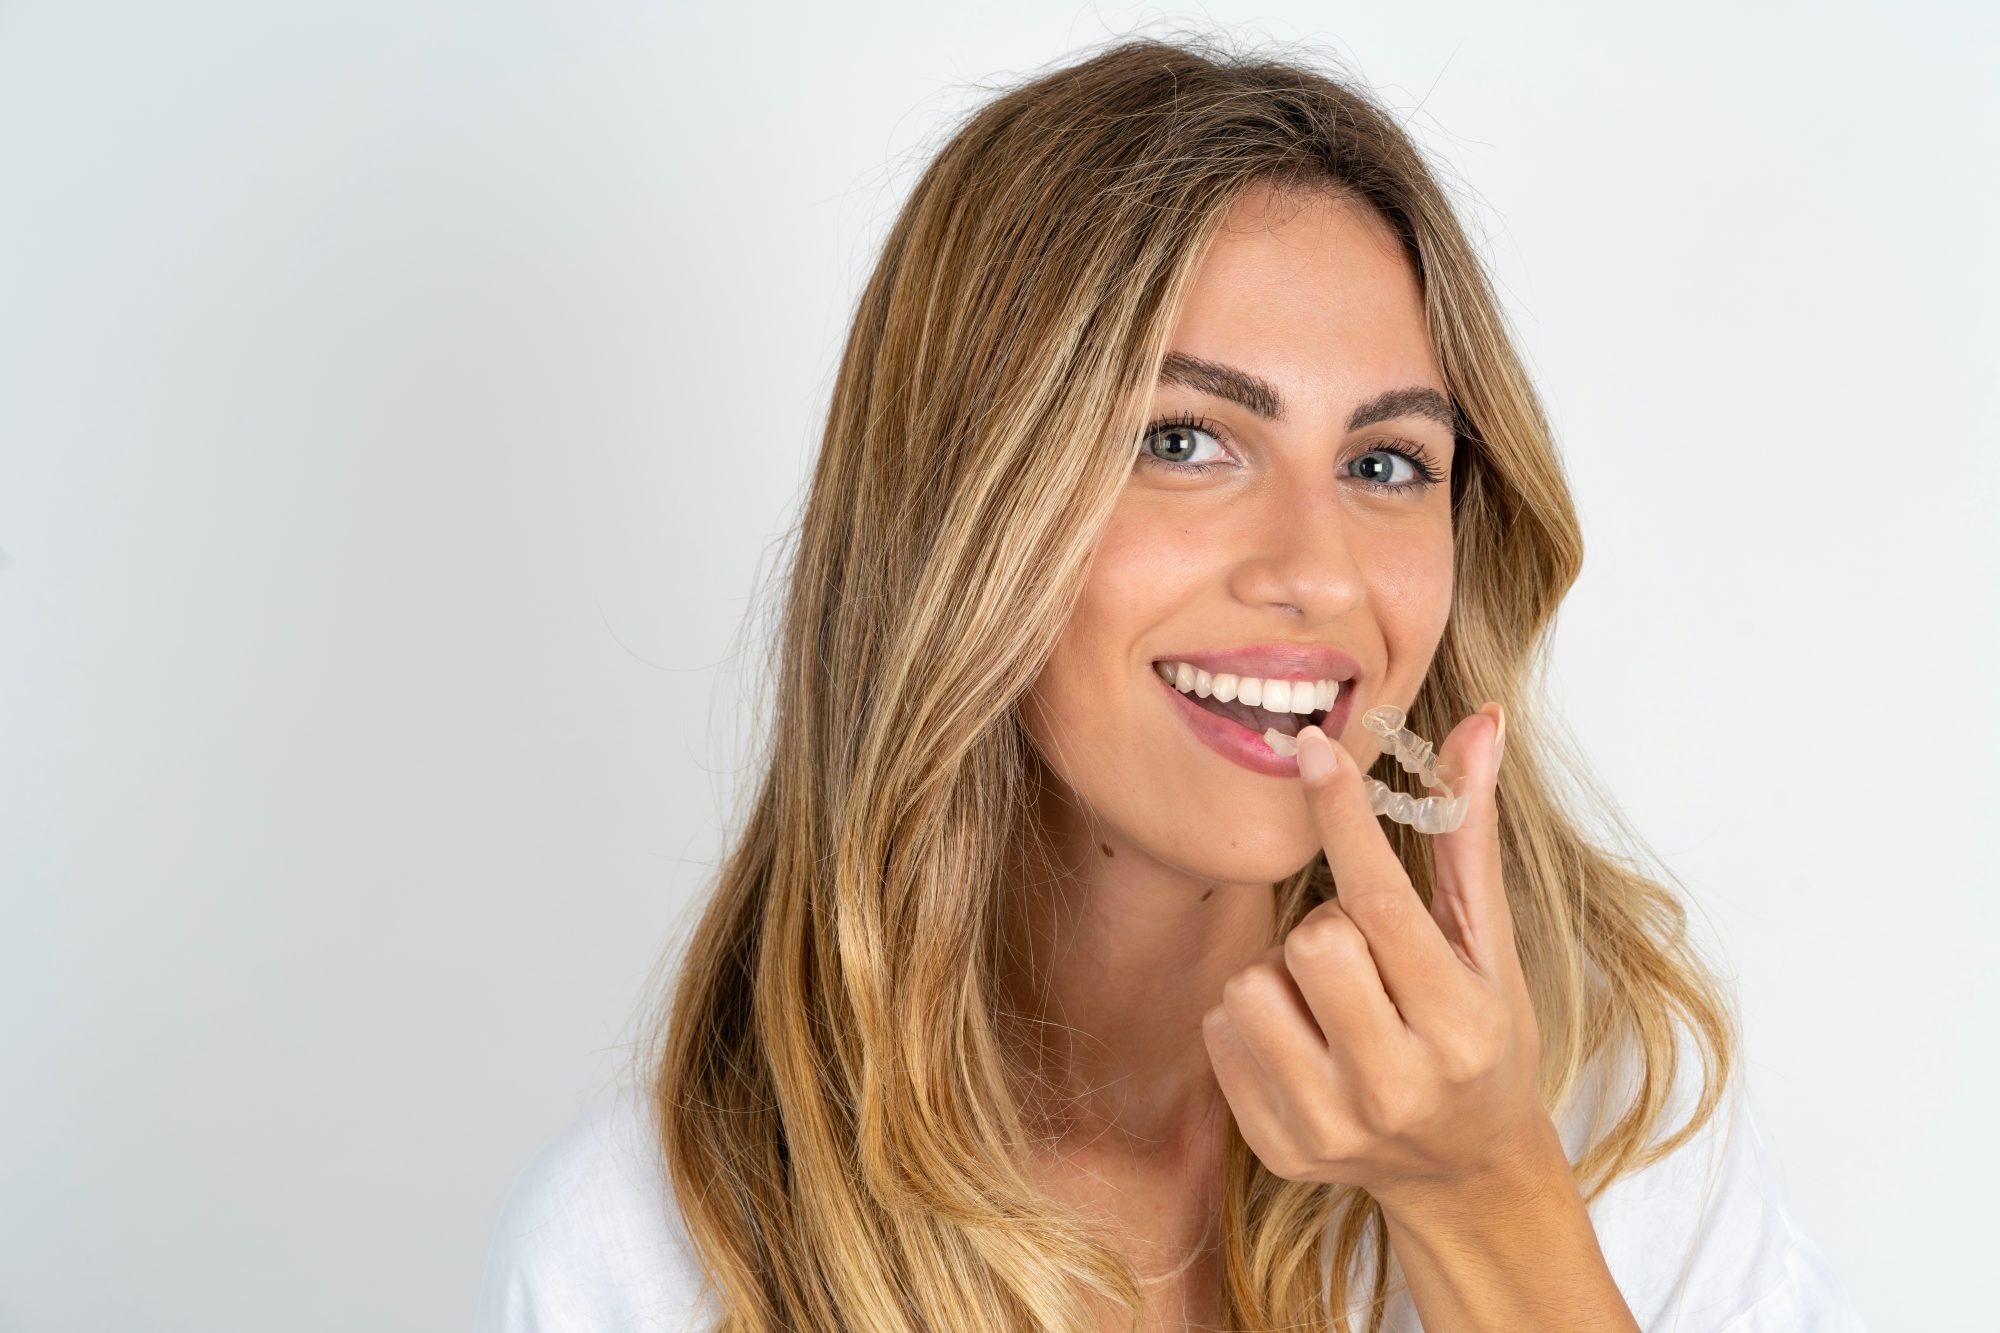 Straighten Your Smile, Boost Your Confidence: The Benefits of Invisalign Treatment